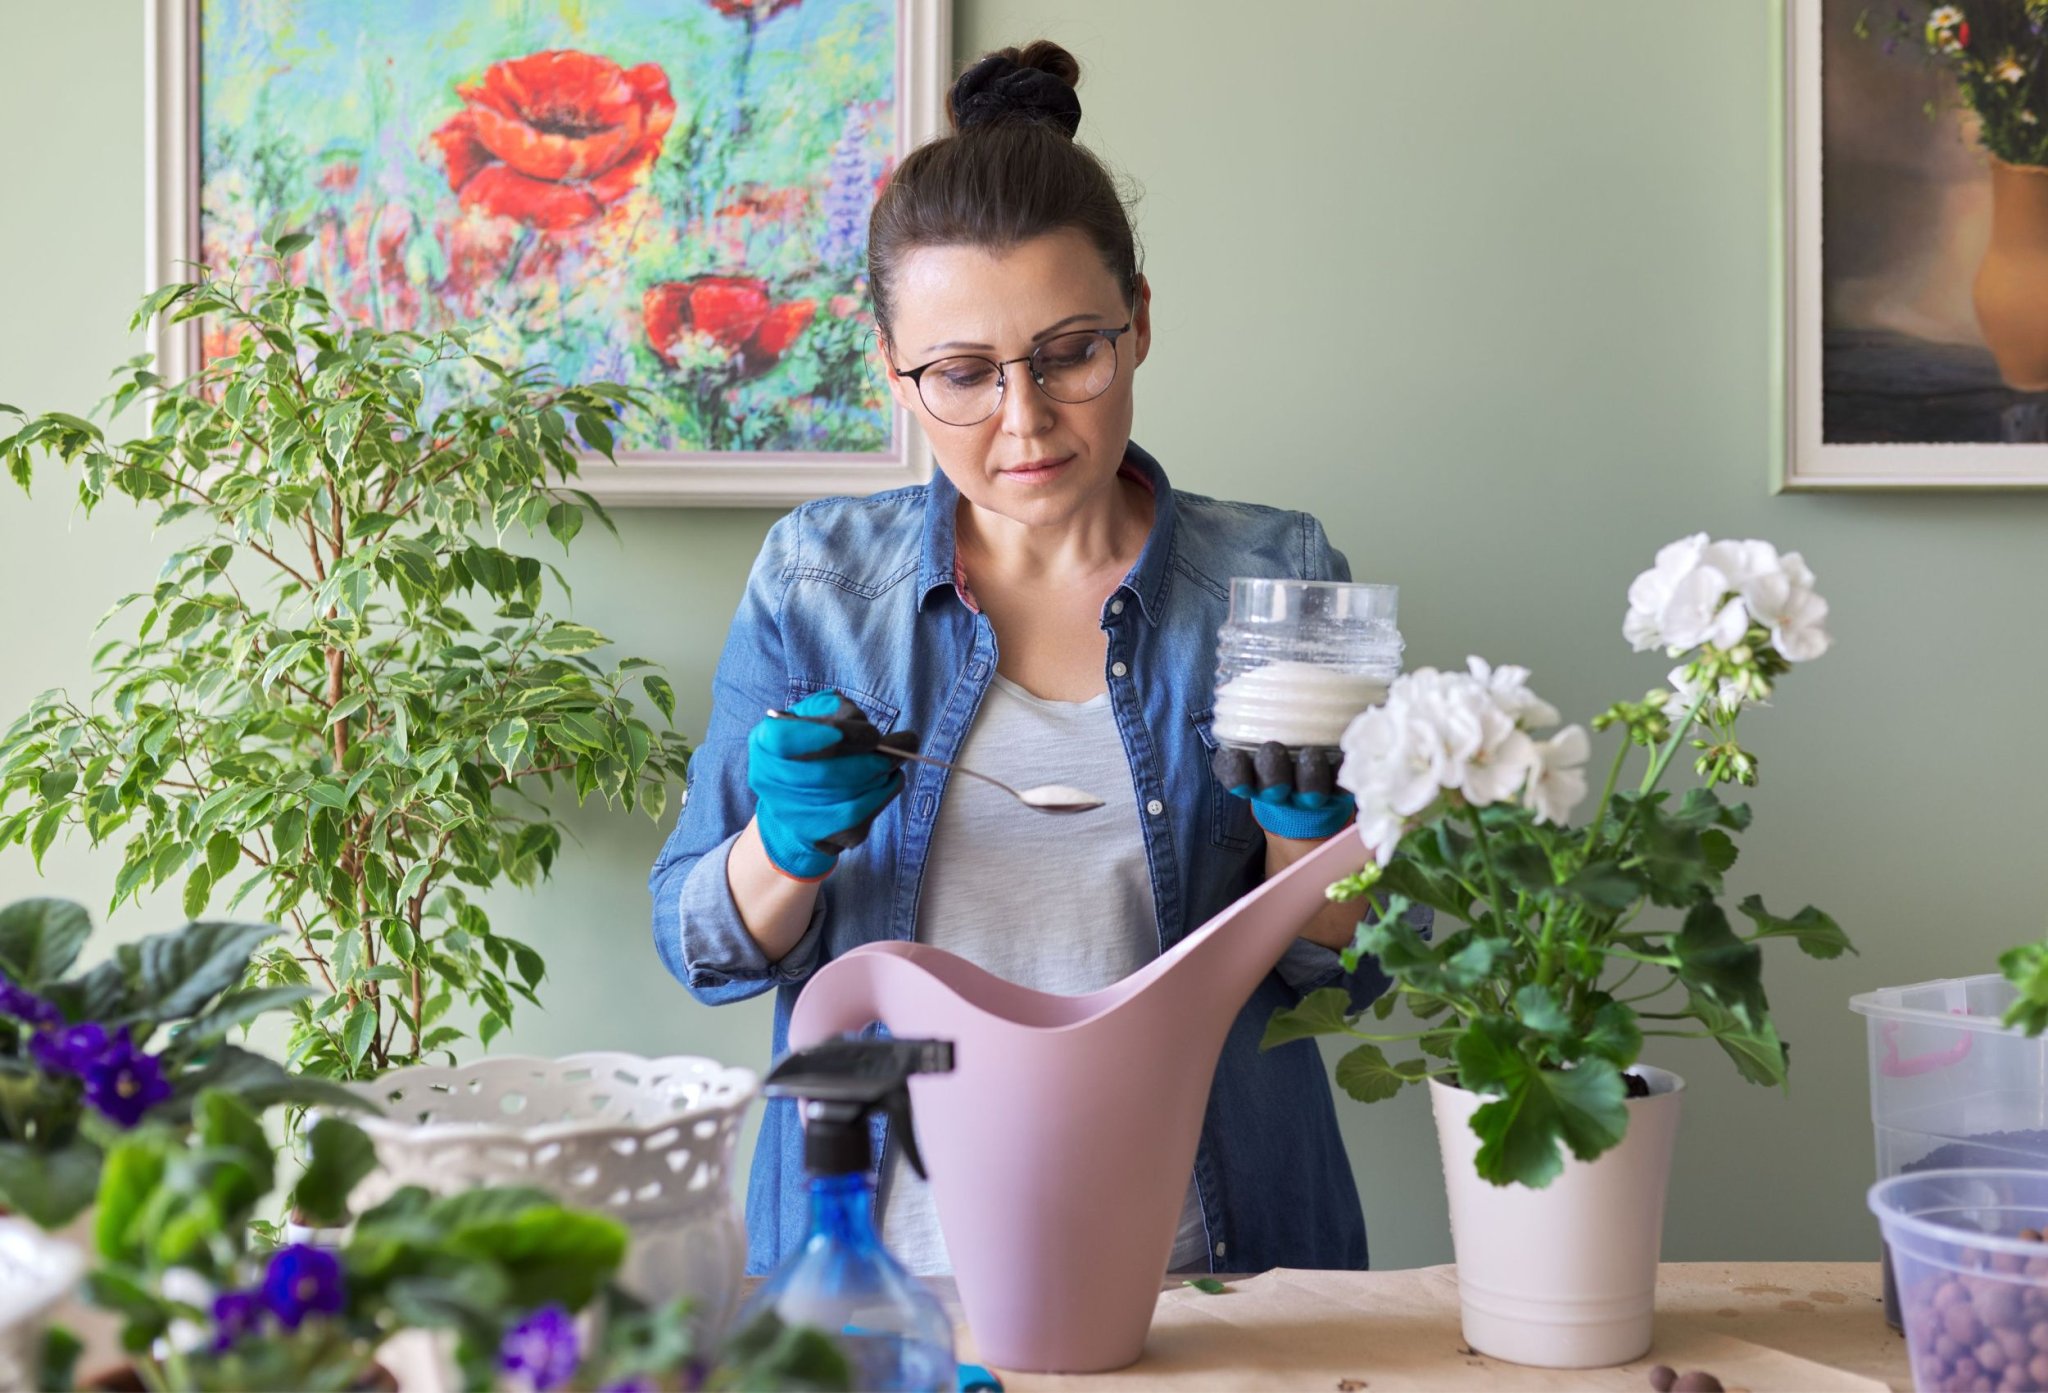 6 Reasons To Use Epsom Salt in Your Houseplants Today